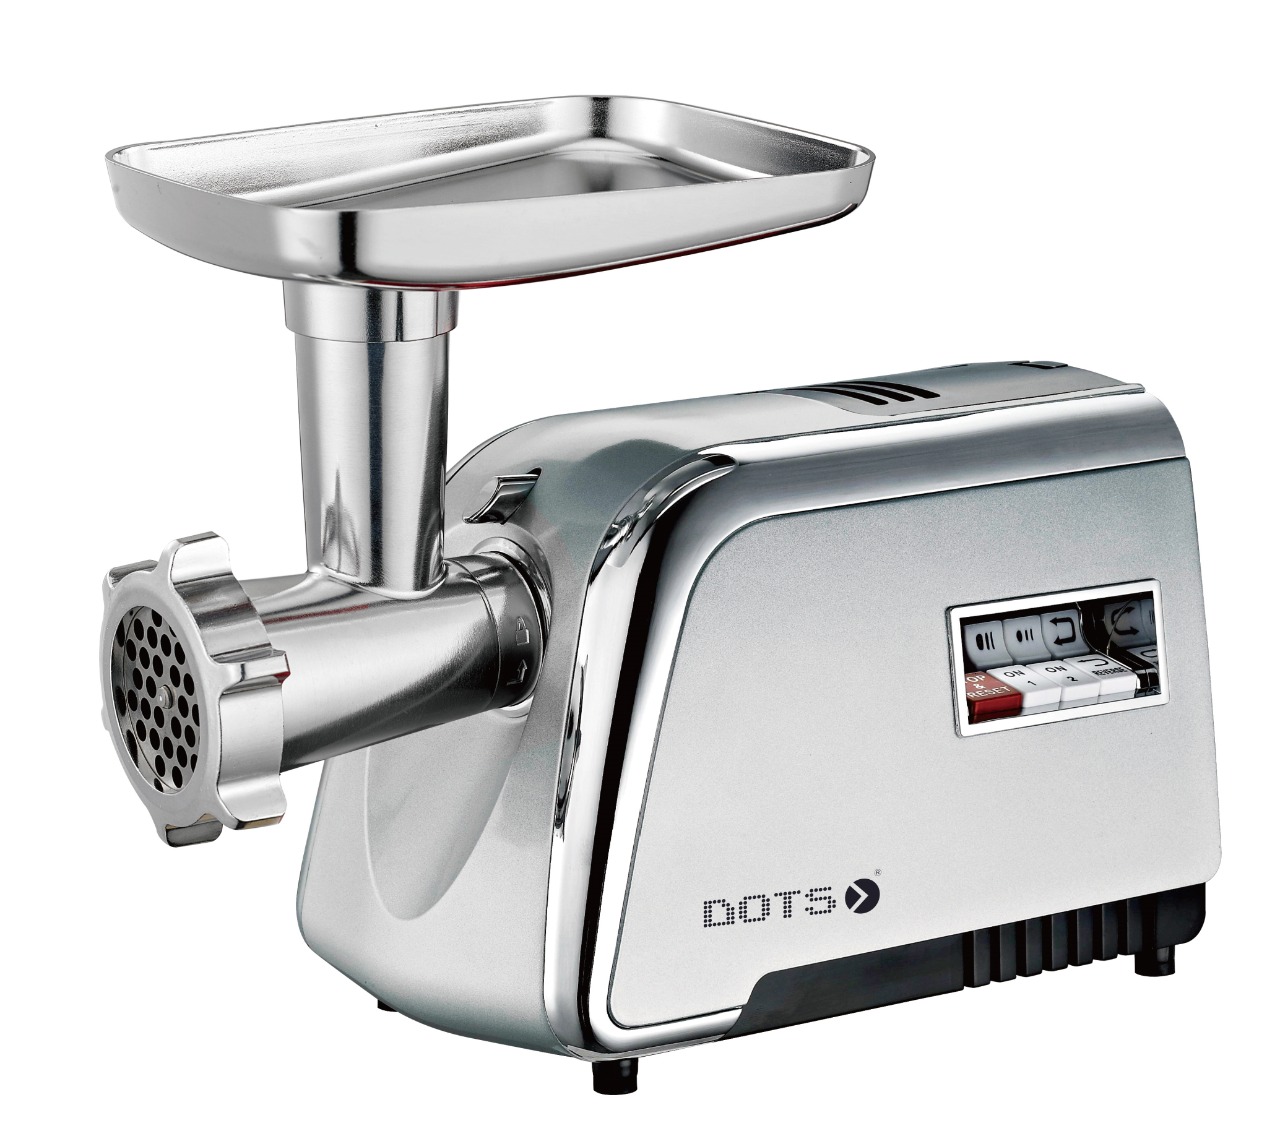 Dots Meat Mincer 2100W, Stainless Steel Blades, Copper Motor, 2 speed - MG-250R